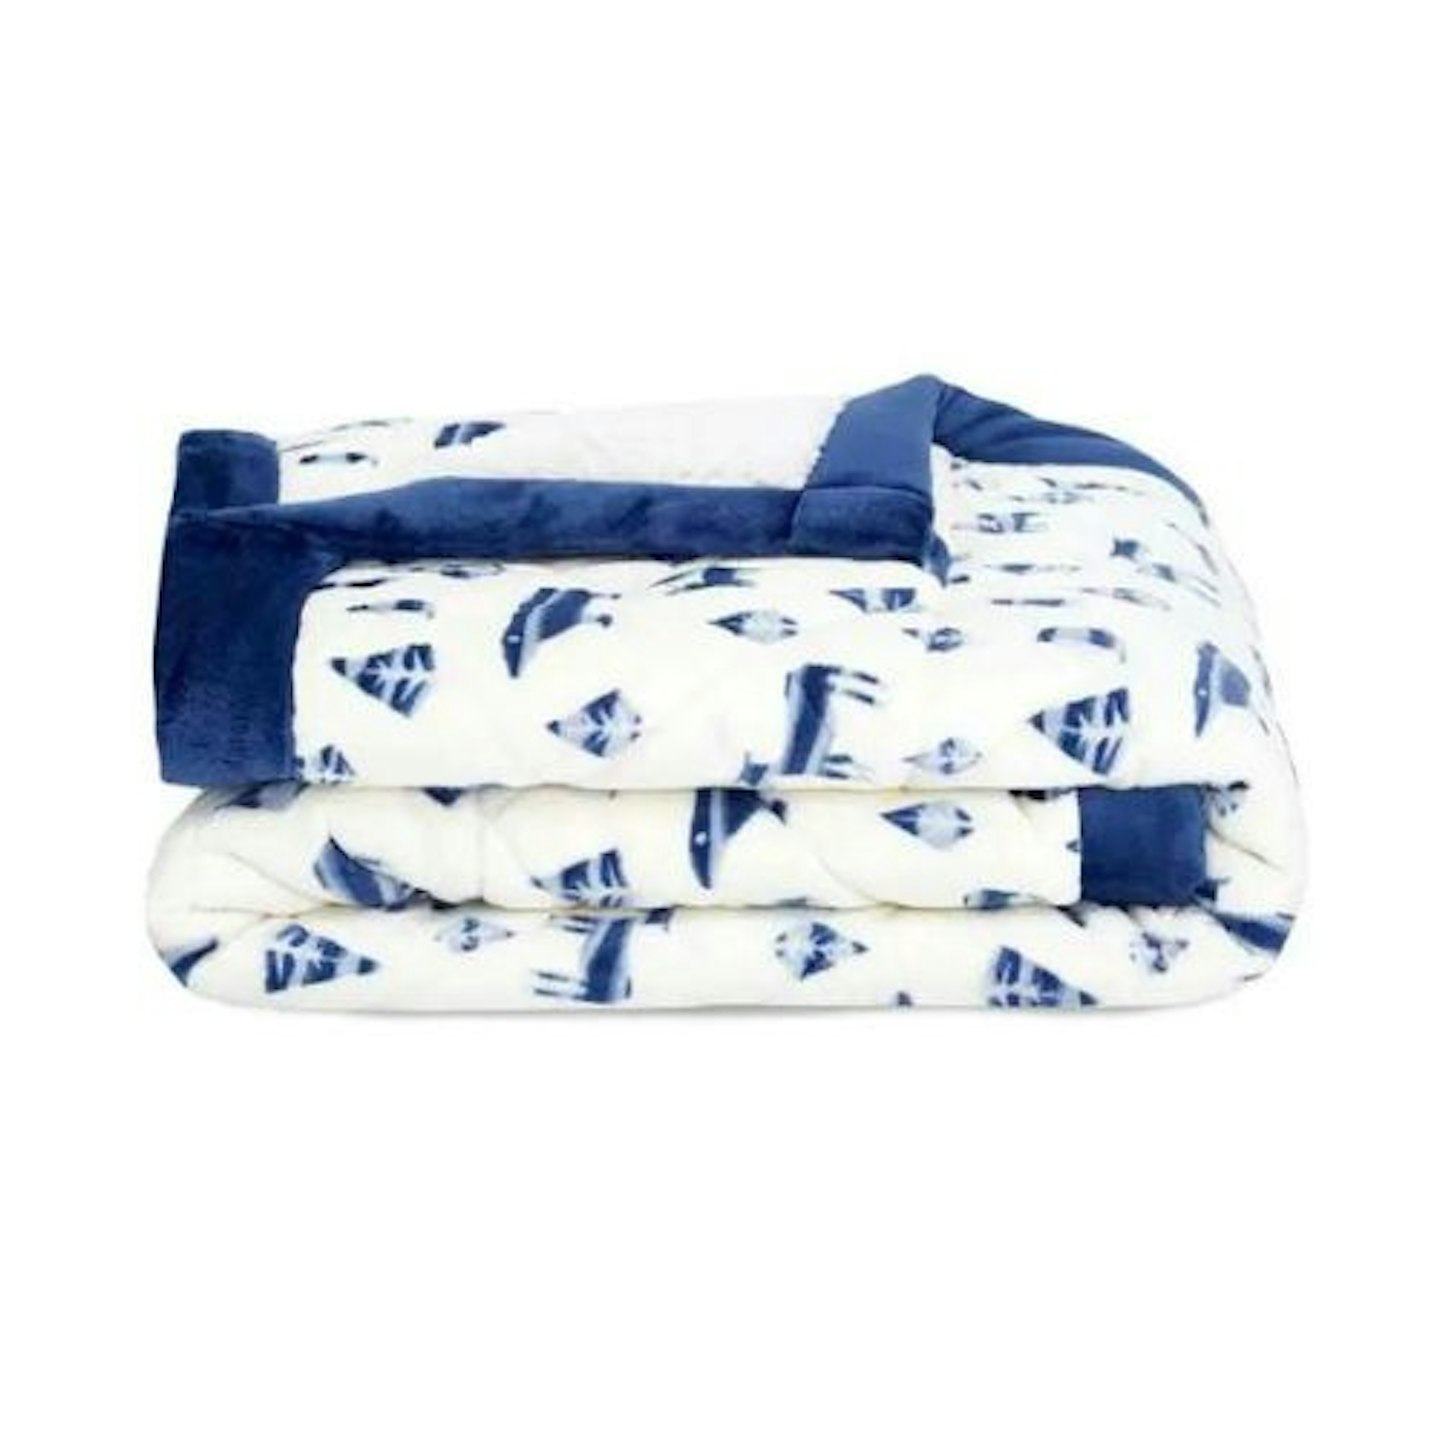 aden + anais baby products - Moody nordic : Sherpa Toddler-Bed Weighted Blanket 1.2 KGS